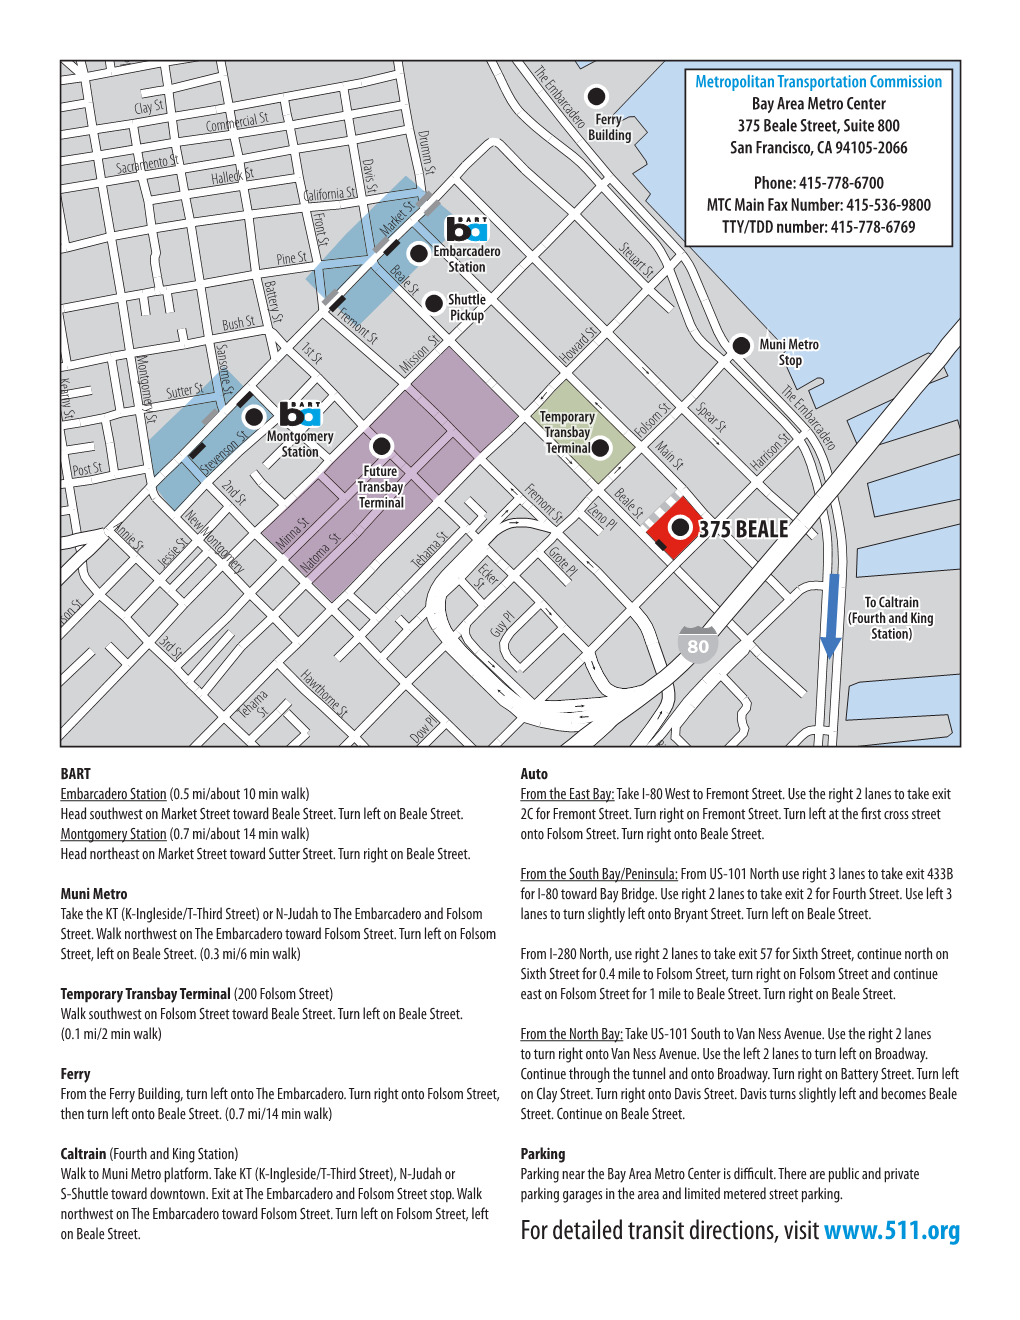 Bay Area Metro Center Map and Directions